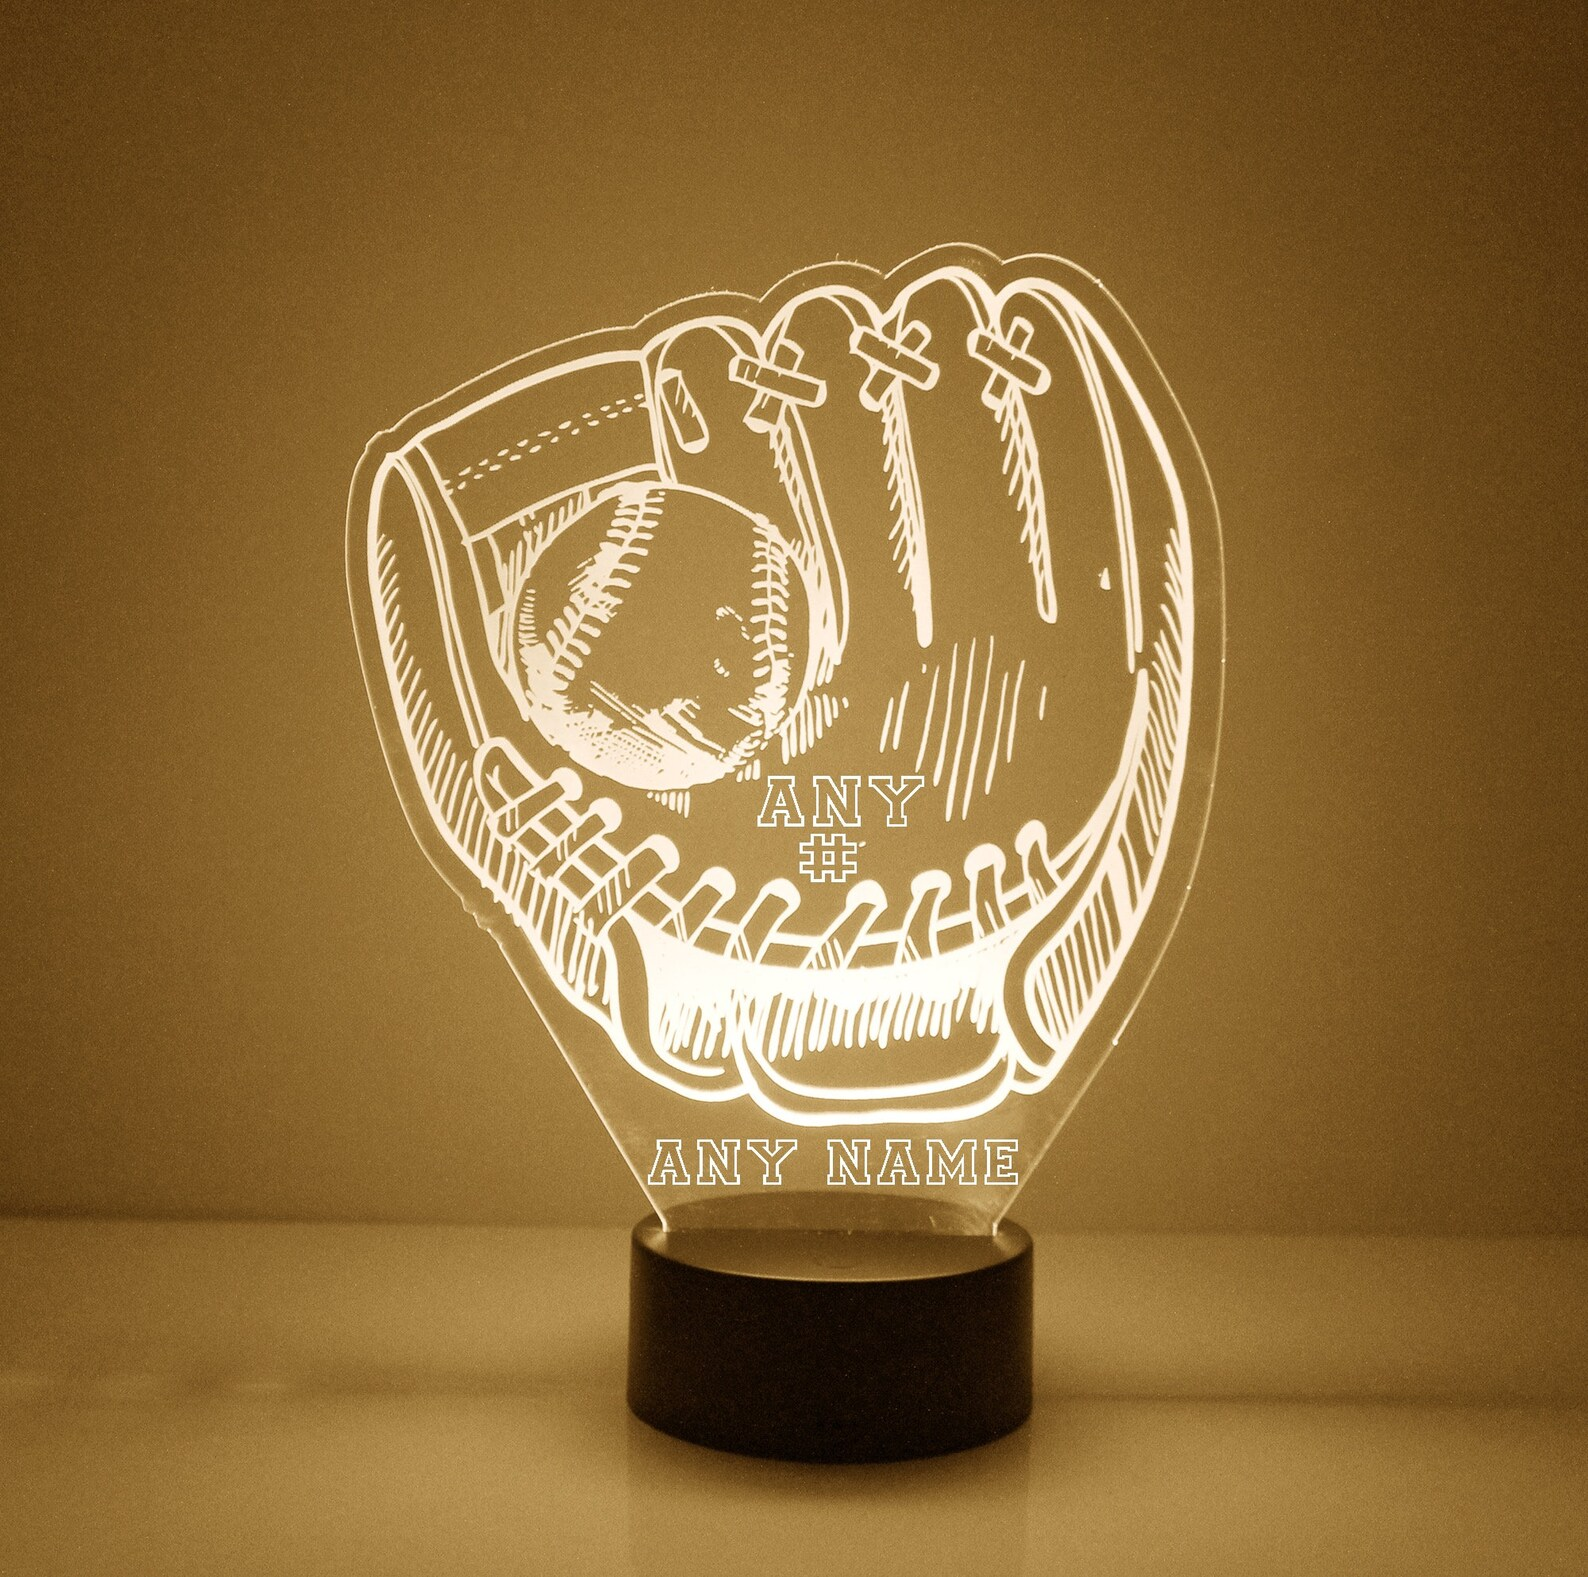 Senior Night is the perfect time to give baseball themed team gifts. Find this glove lamp at MirrorMagicGifts on Etsy.